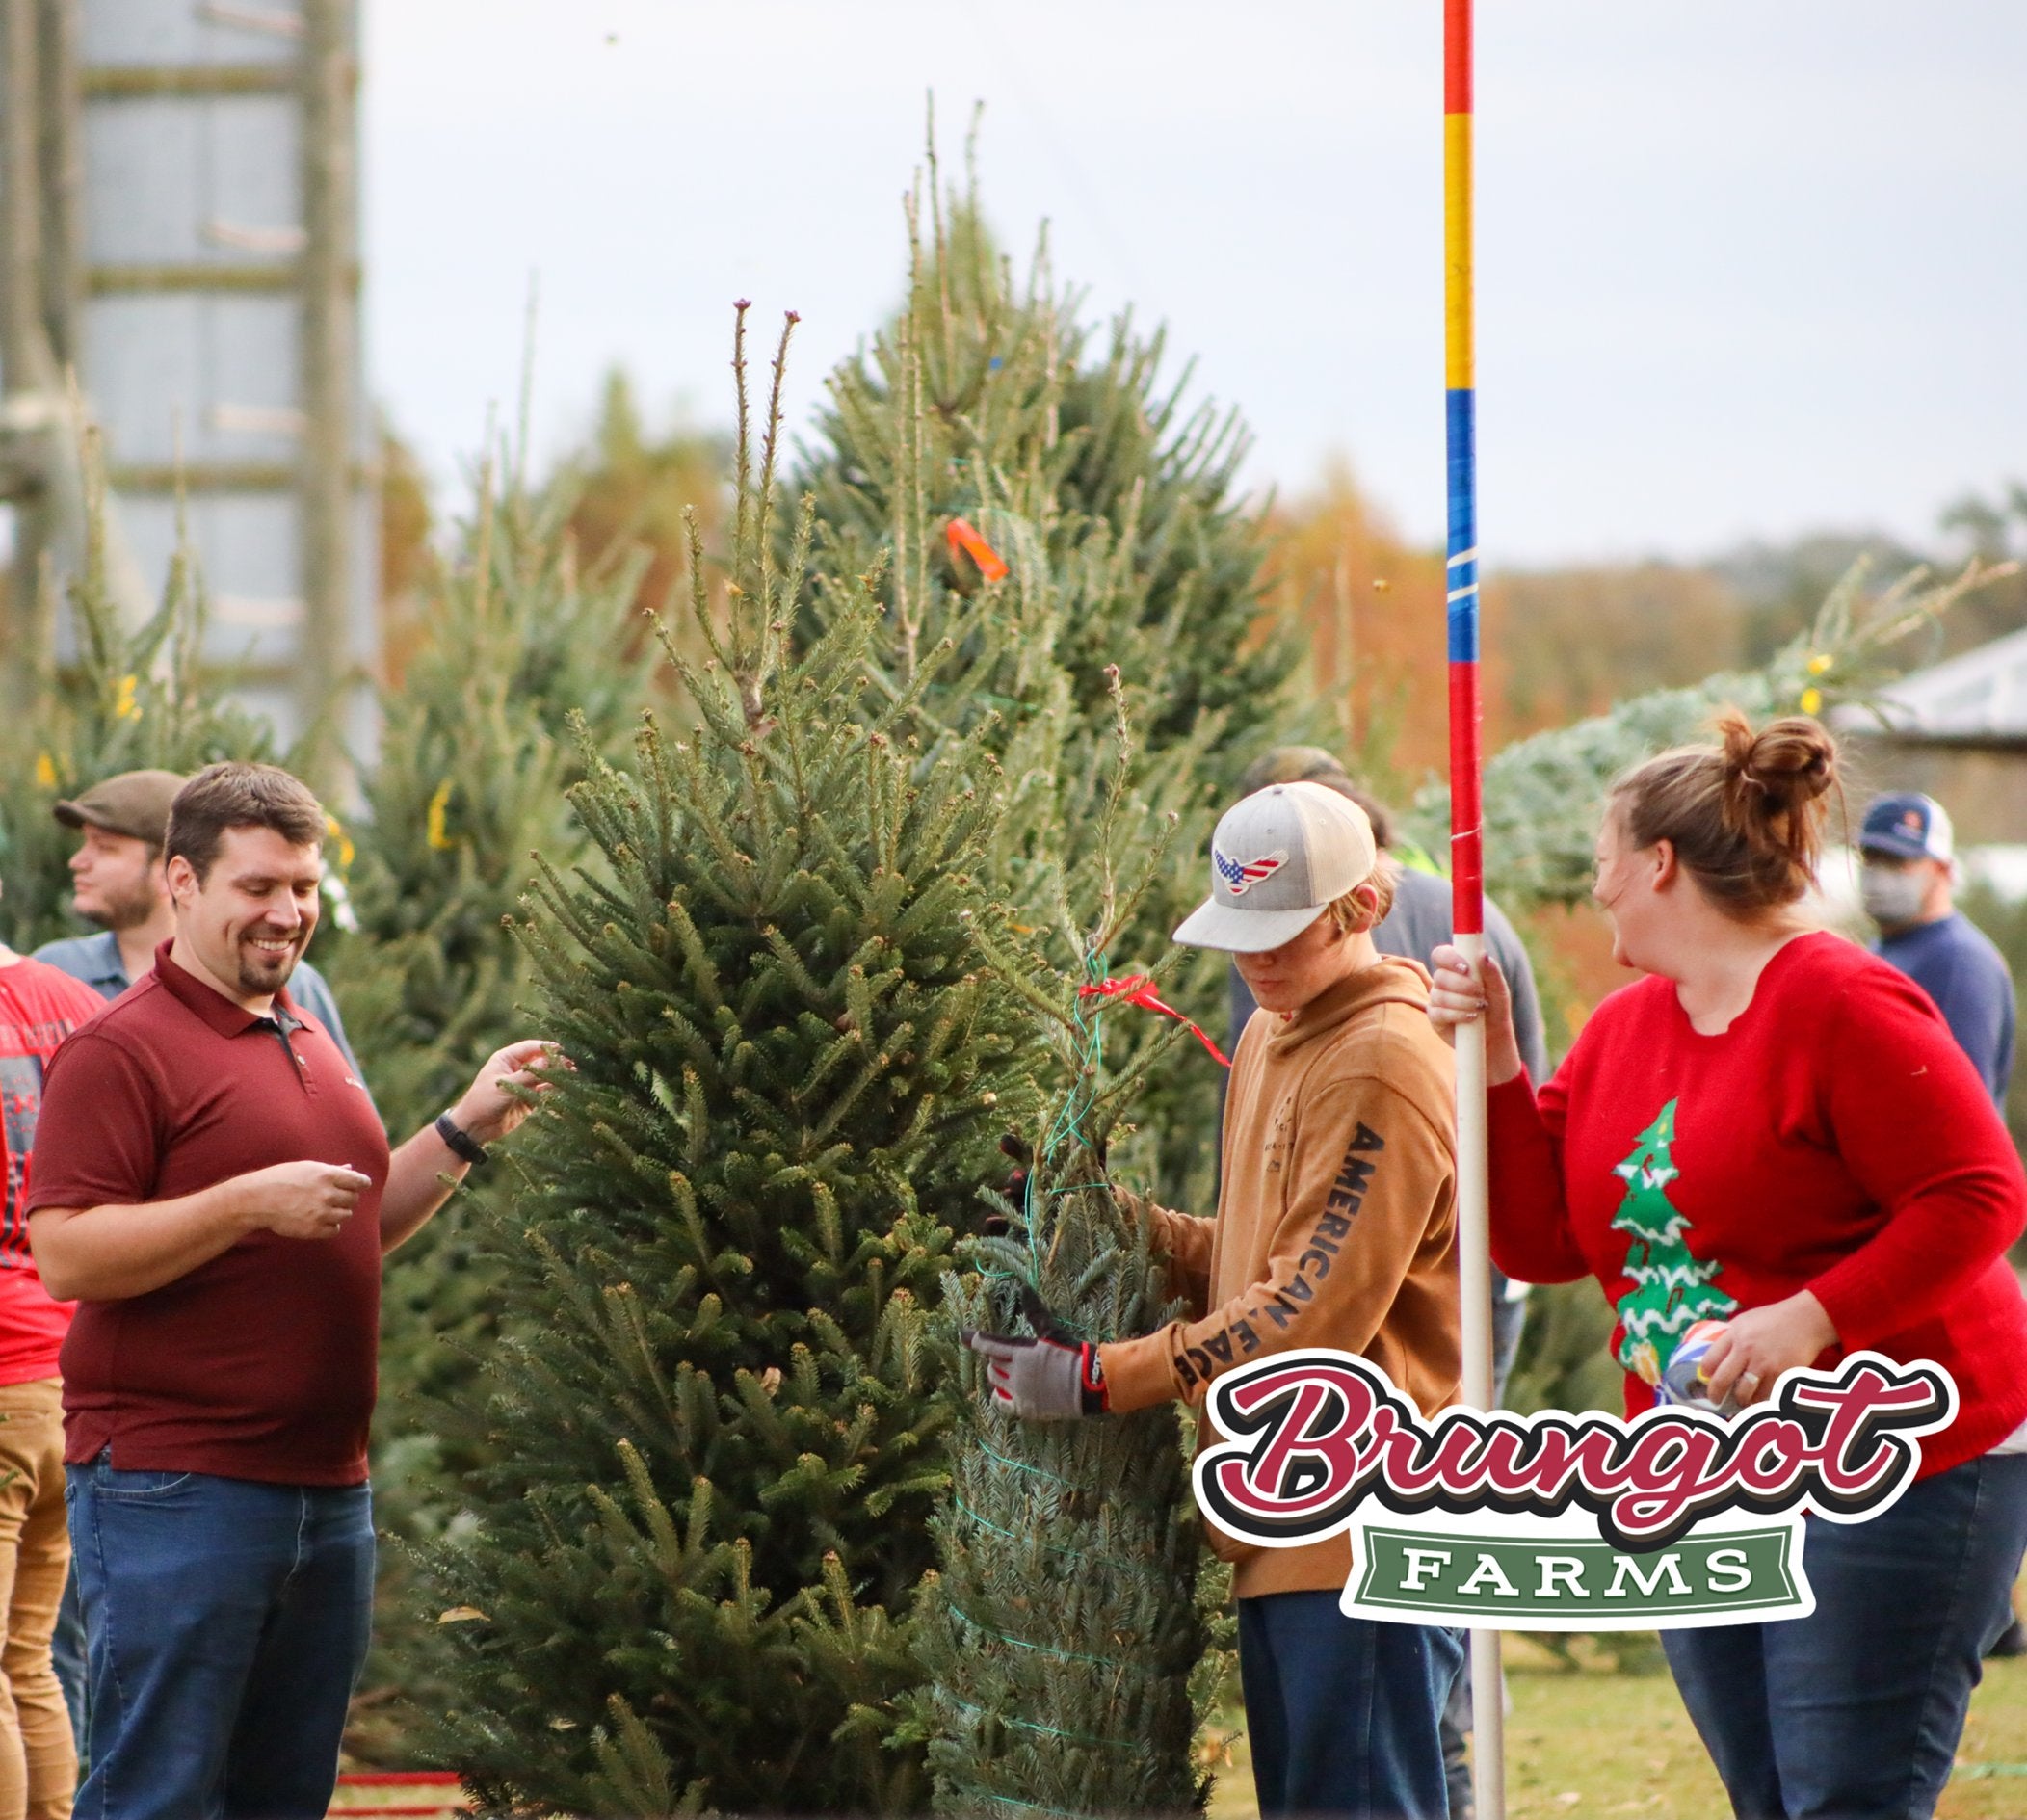 Brungot Farms offers Real Fraser Fir Christmas Trees, Fresh from the Farm.